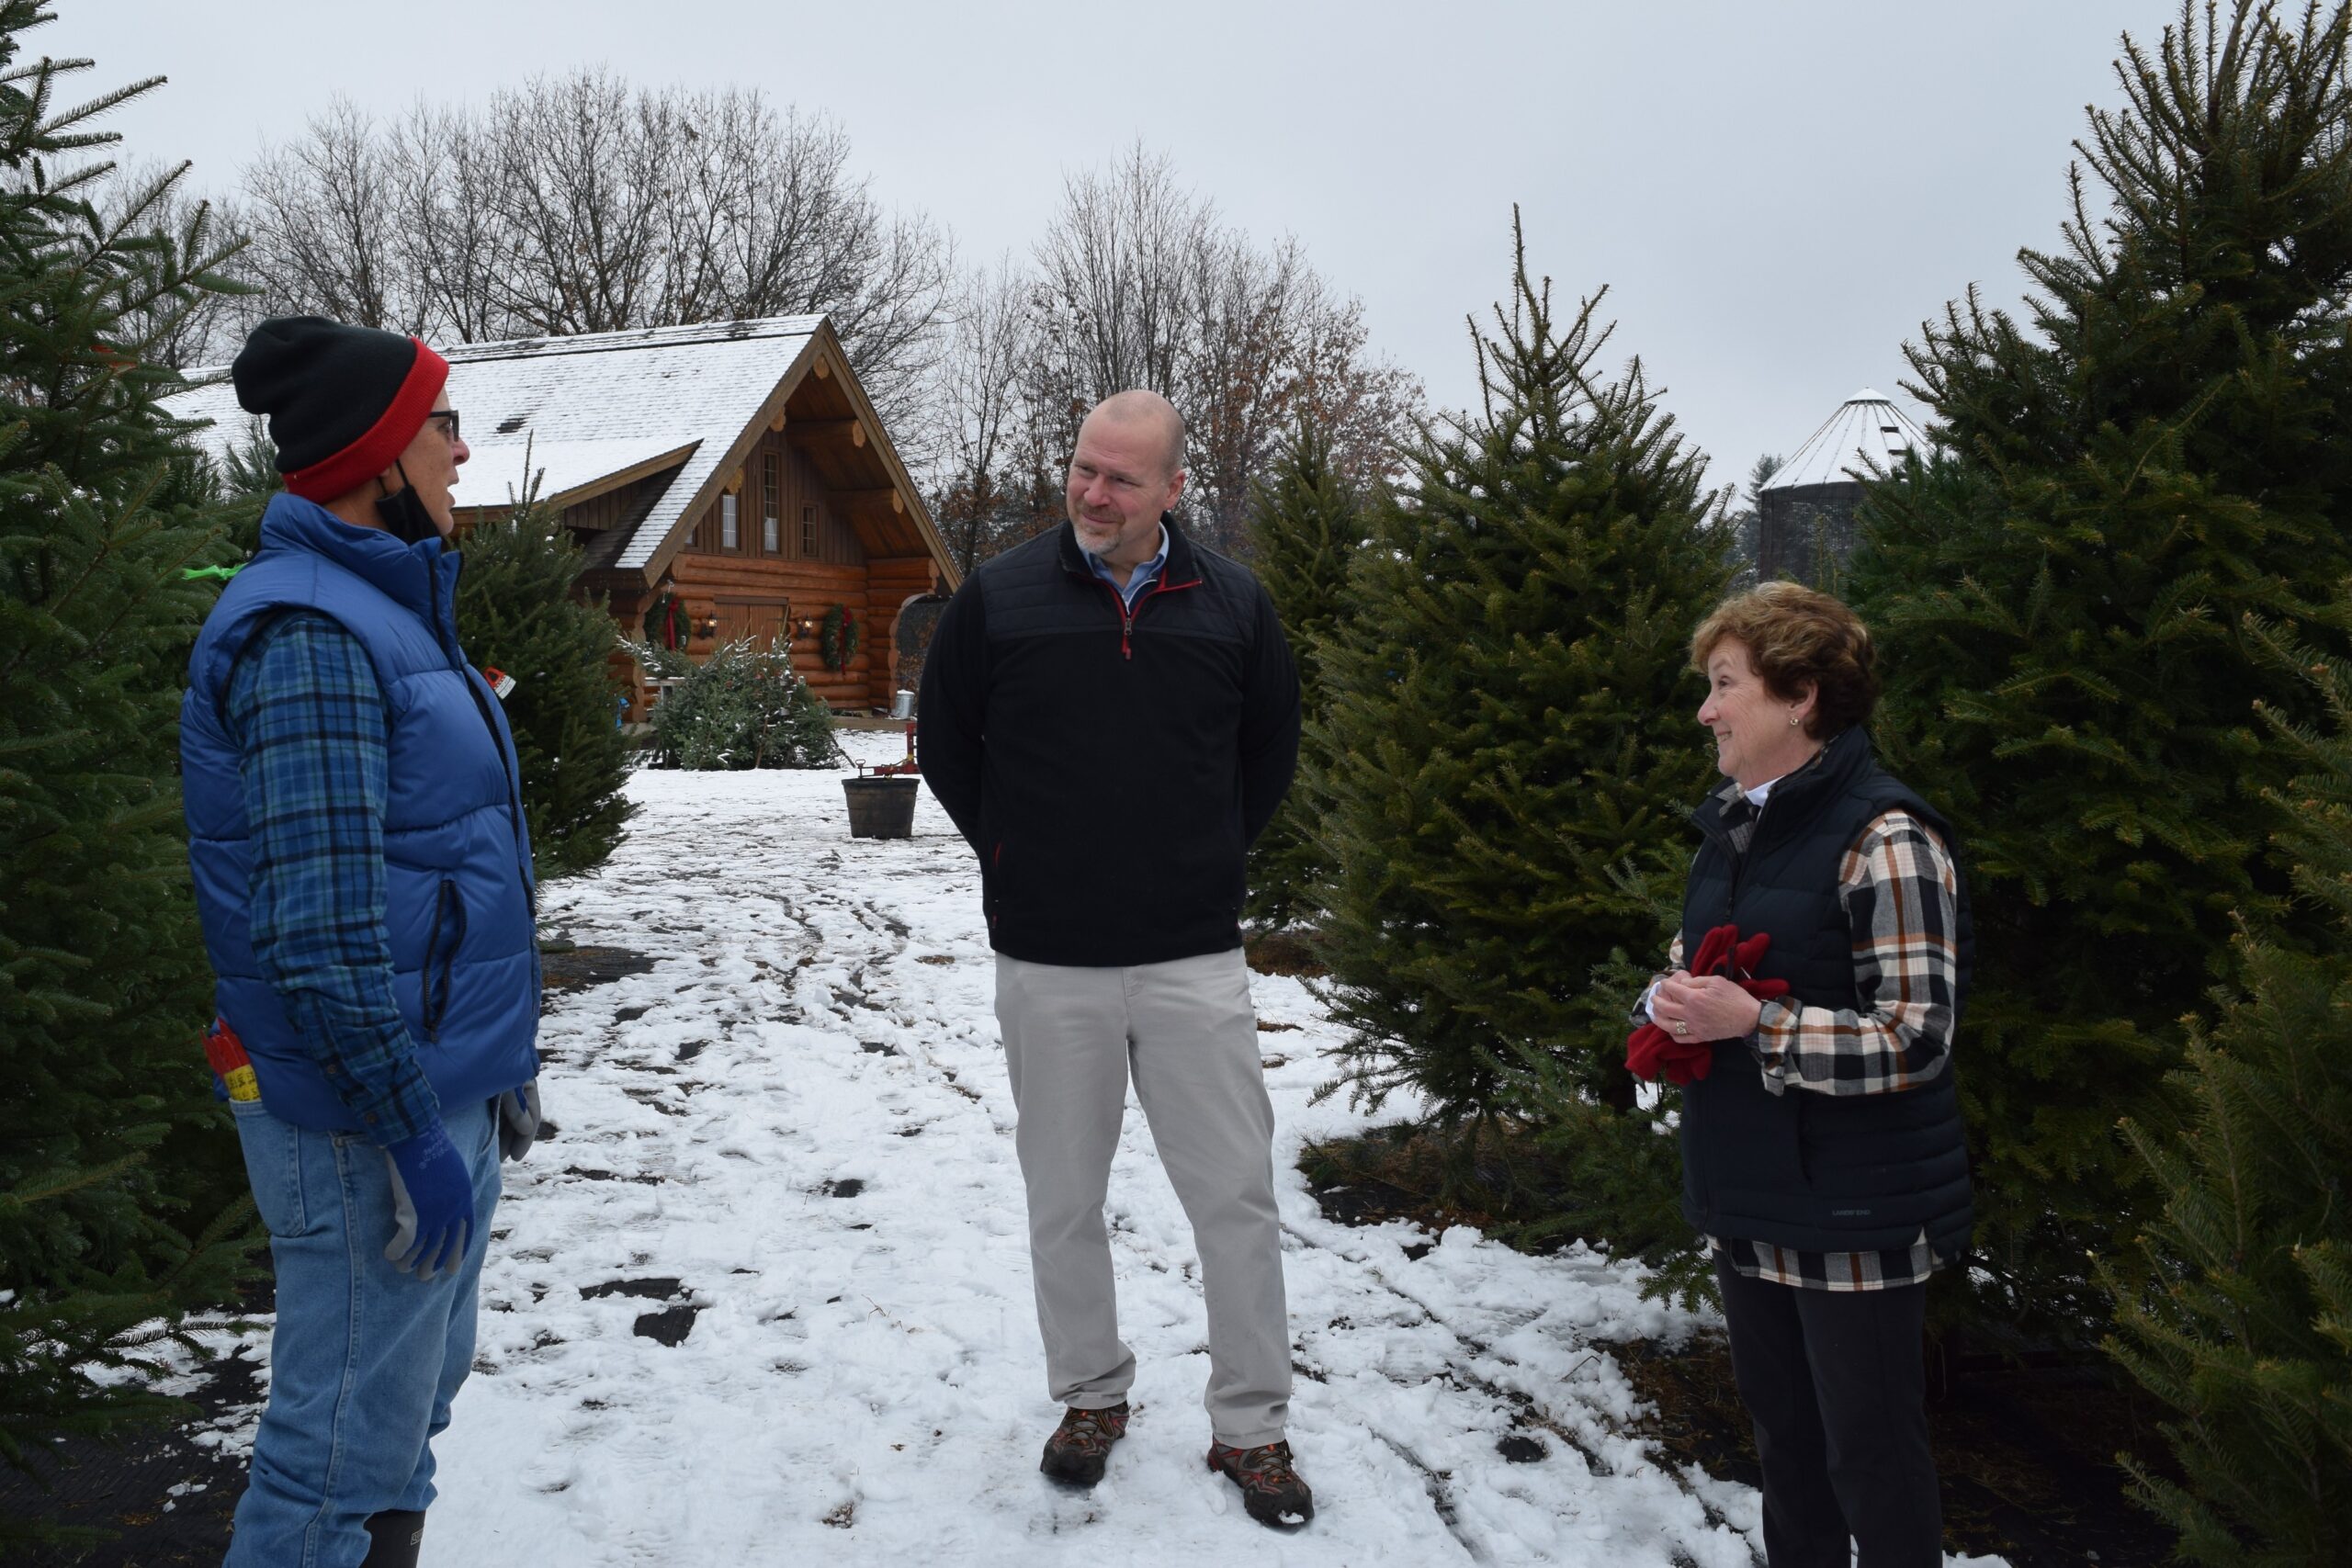 Wisconsin Christmas tree growers see steady supply, business as they navigate pandemic changes